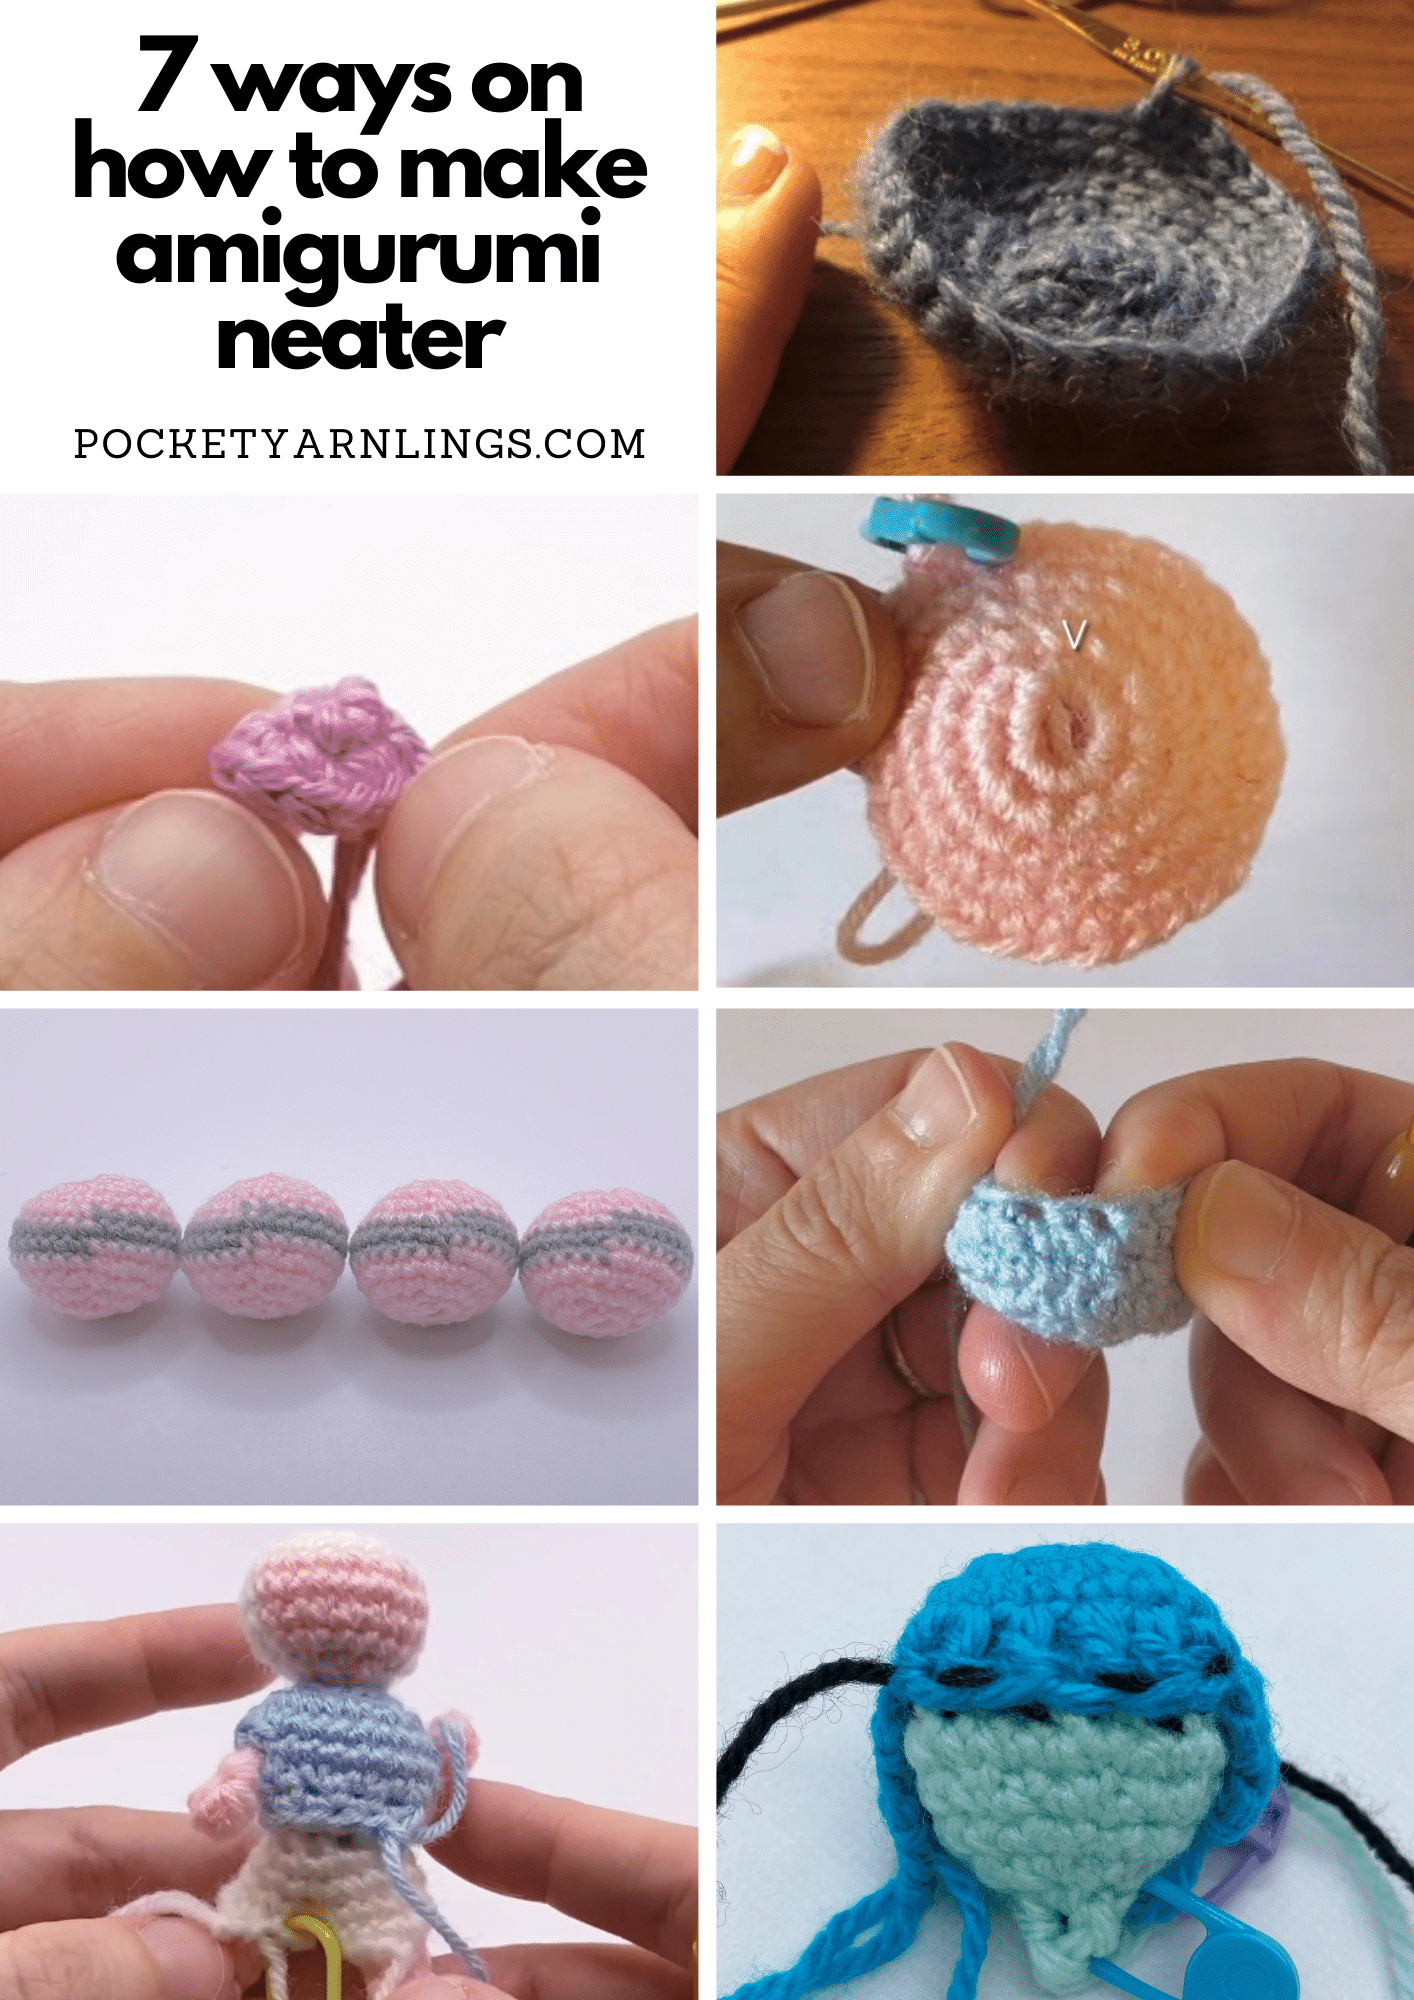 Improve Your Amigurumi Crochet Projects With This One Small Thing